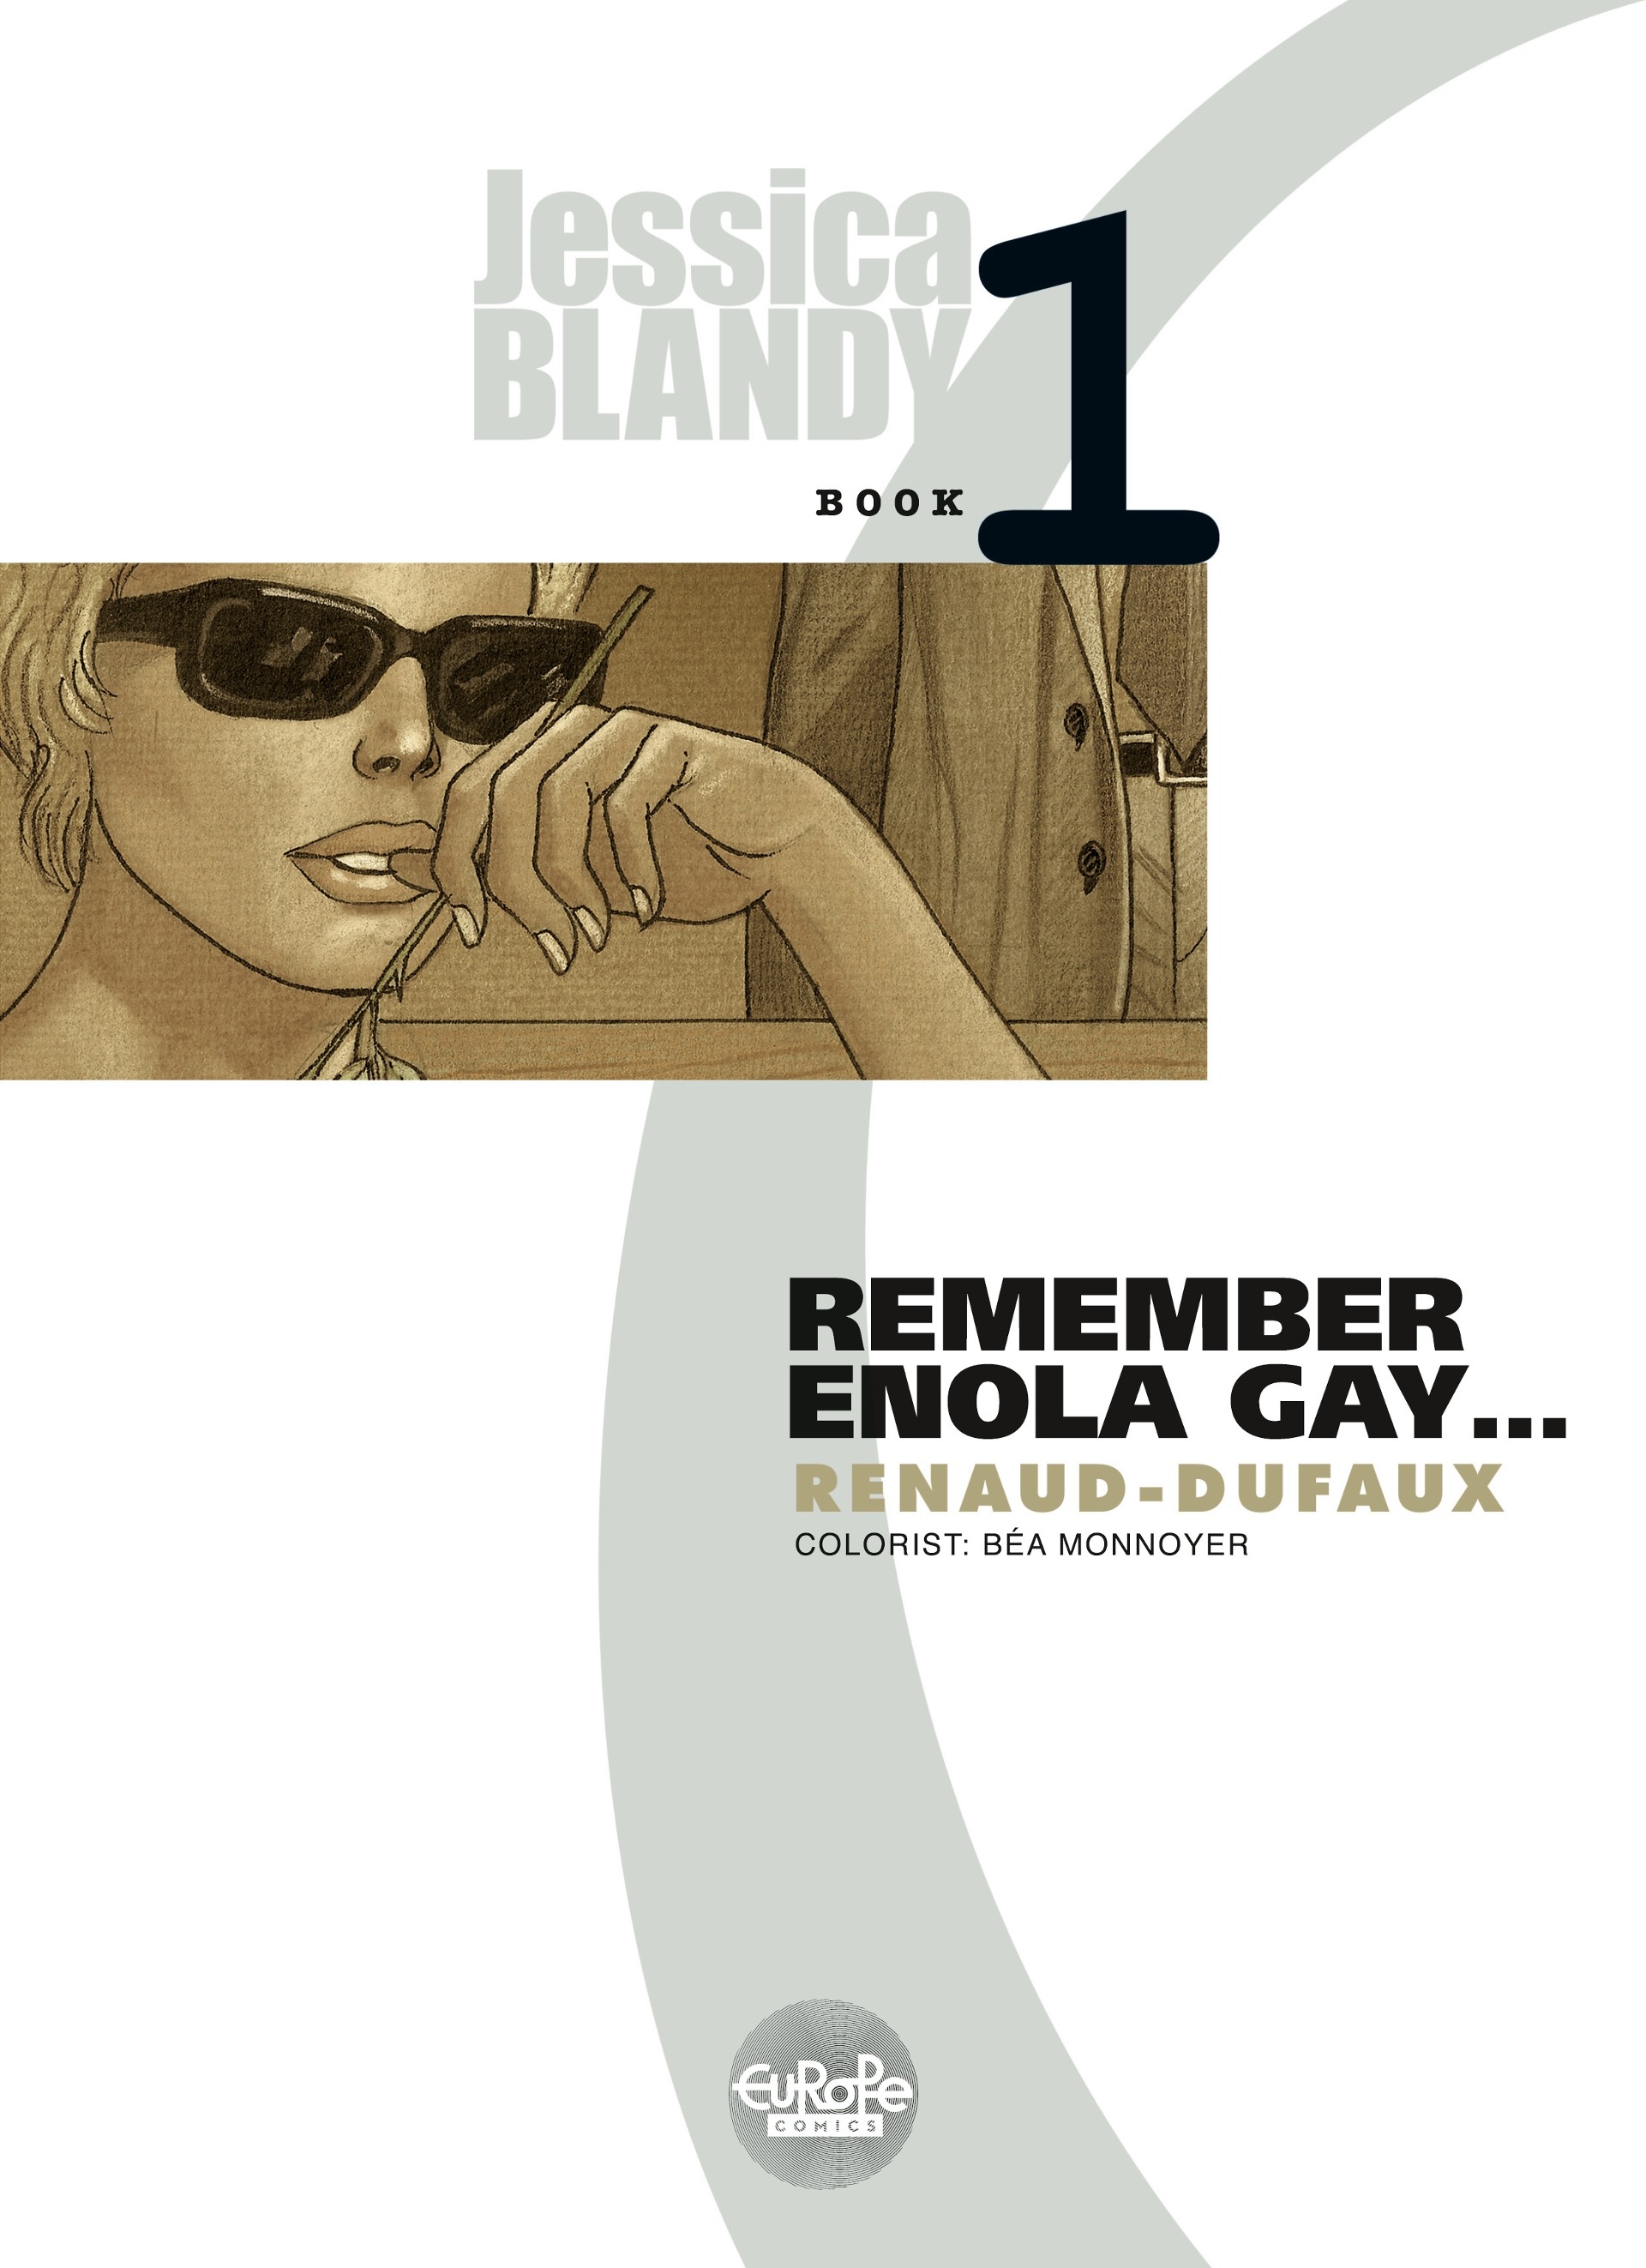 Read online Jessica Blandy comic -  Issue #1 - 2